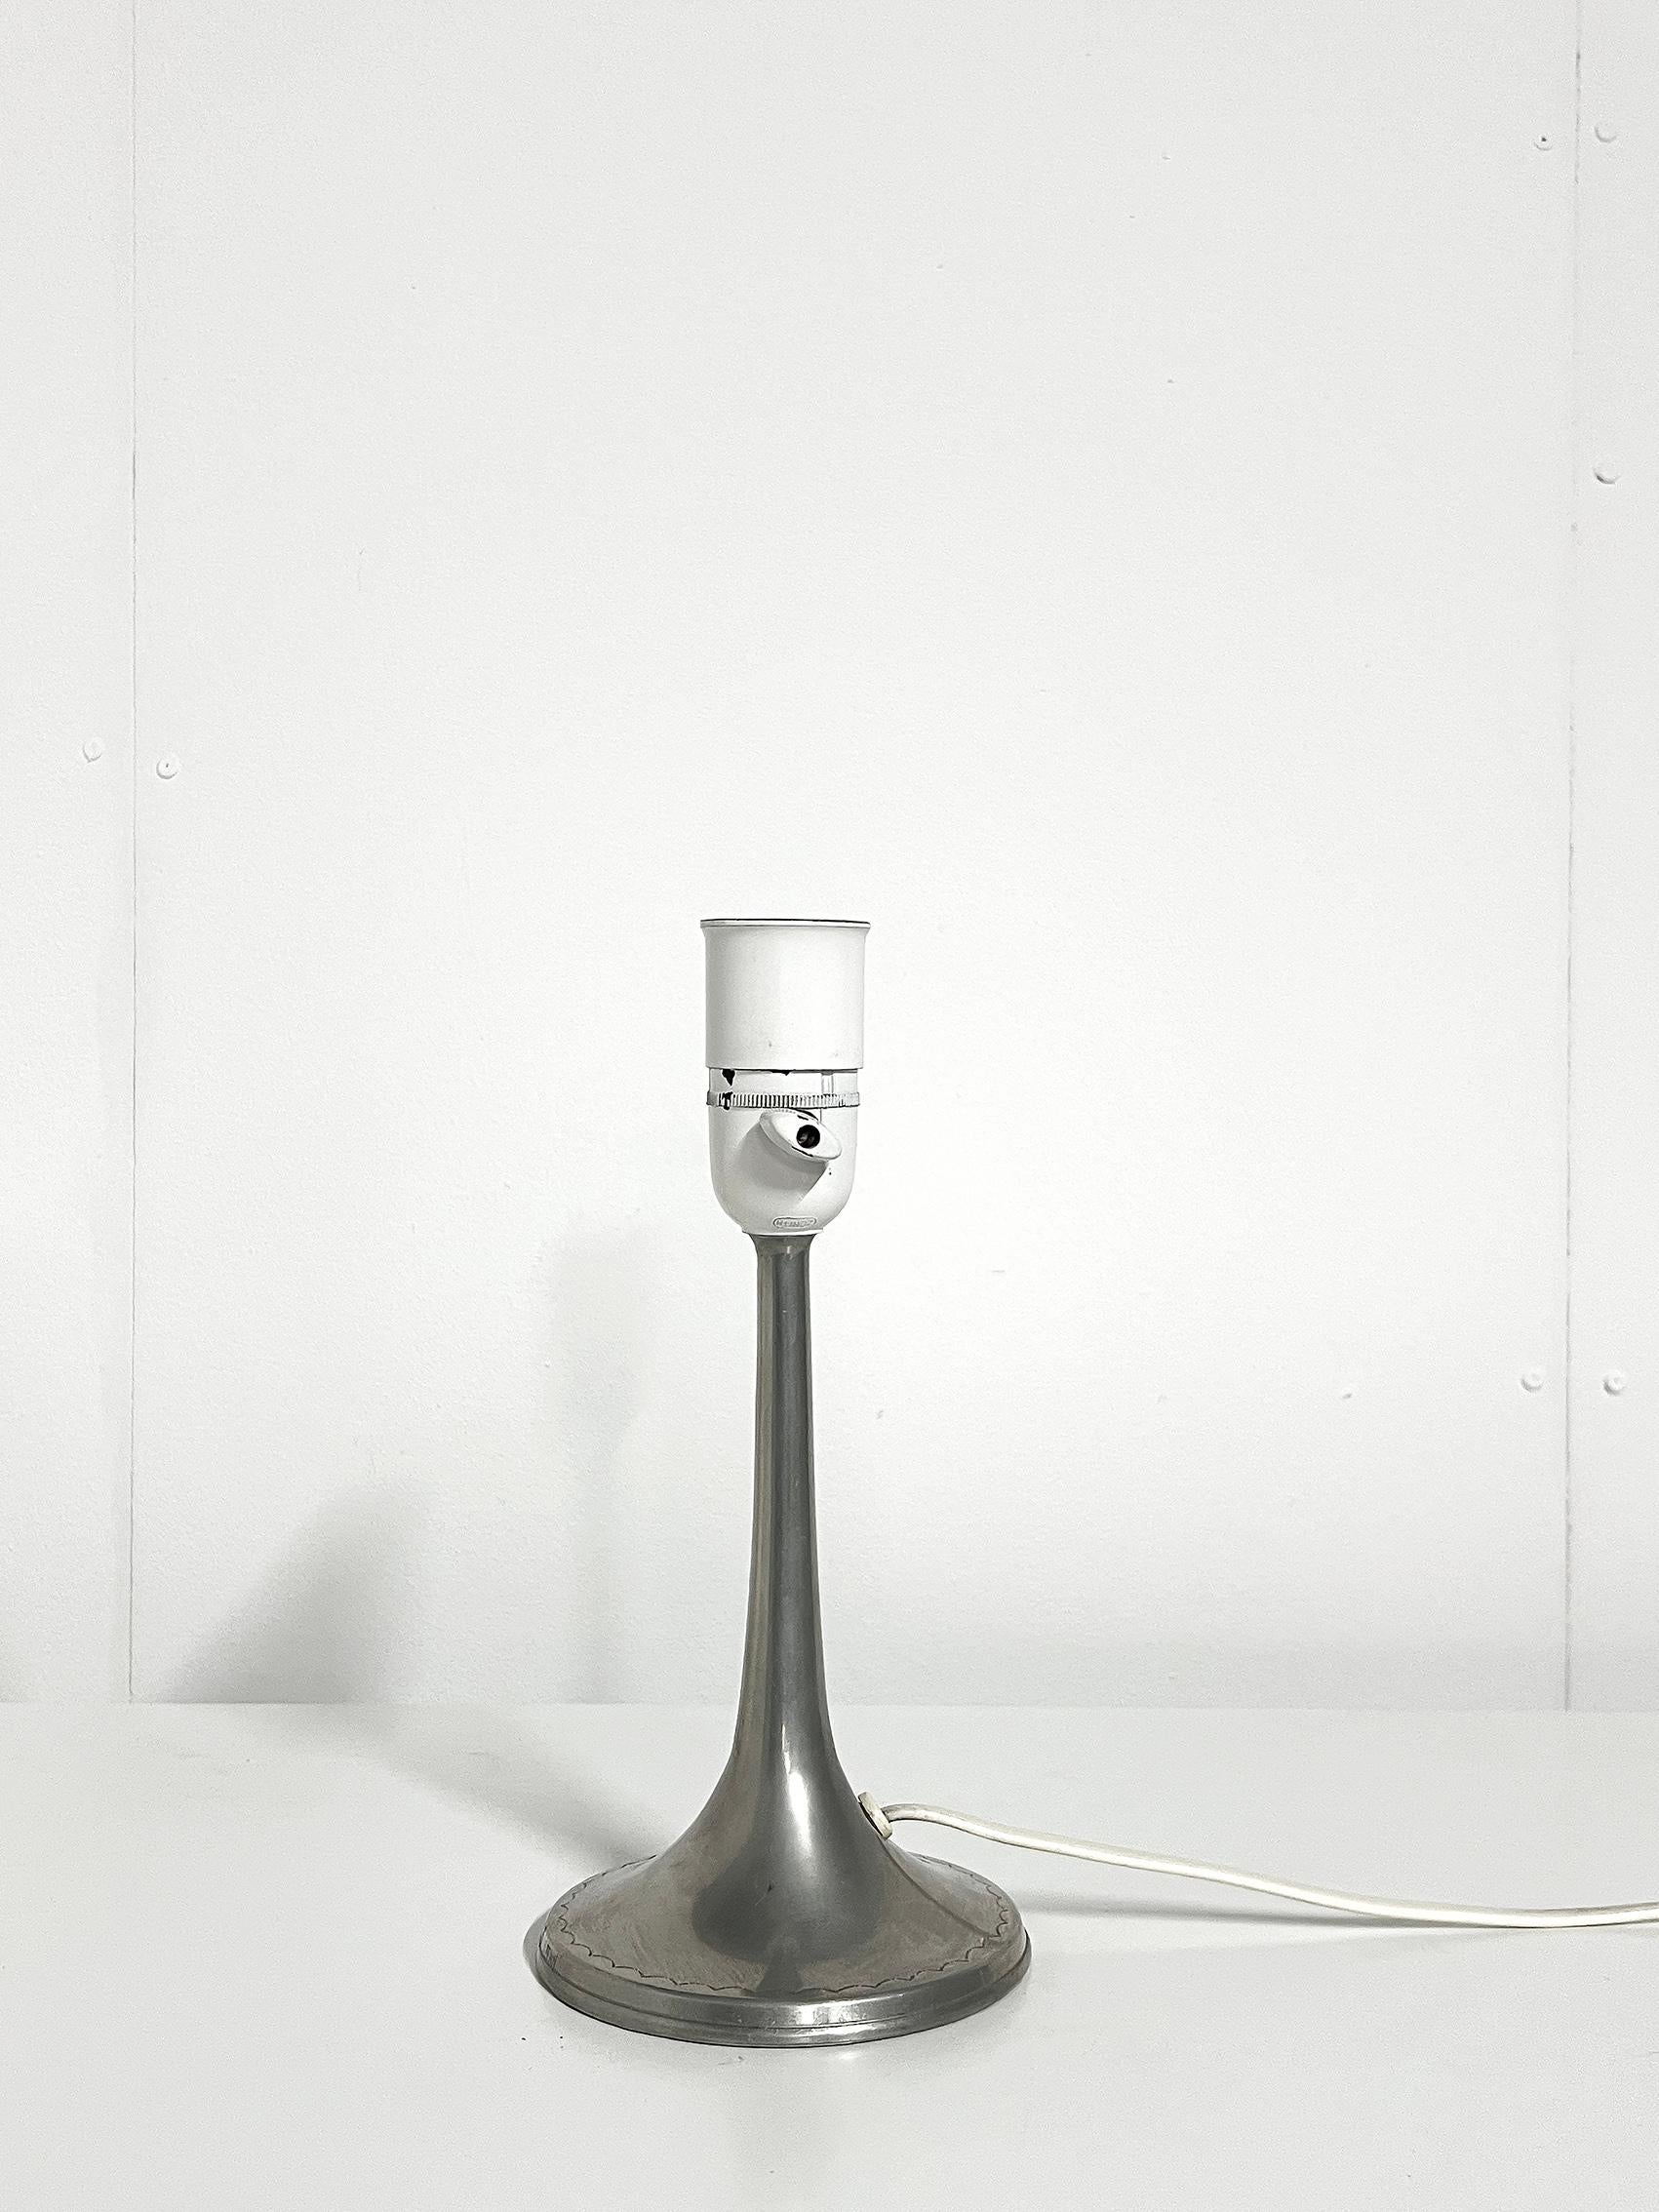 Scandinavian Modern Table Lamp In Pewter by Thorild Knutsson -1930 In Good Condition For Sale In Örebro, SE